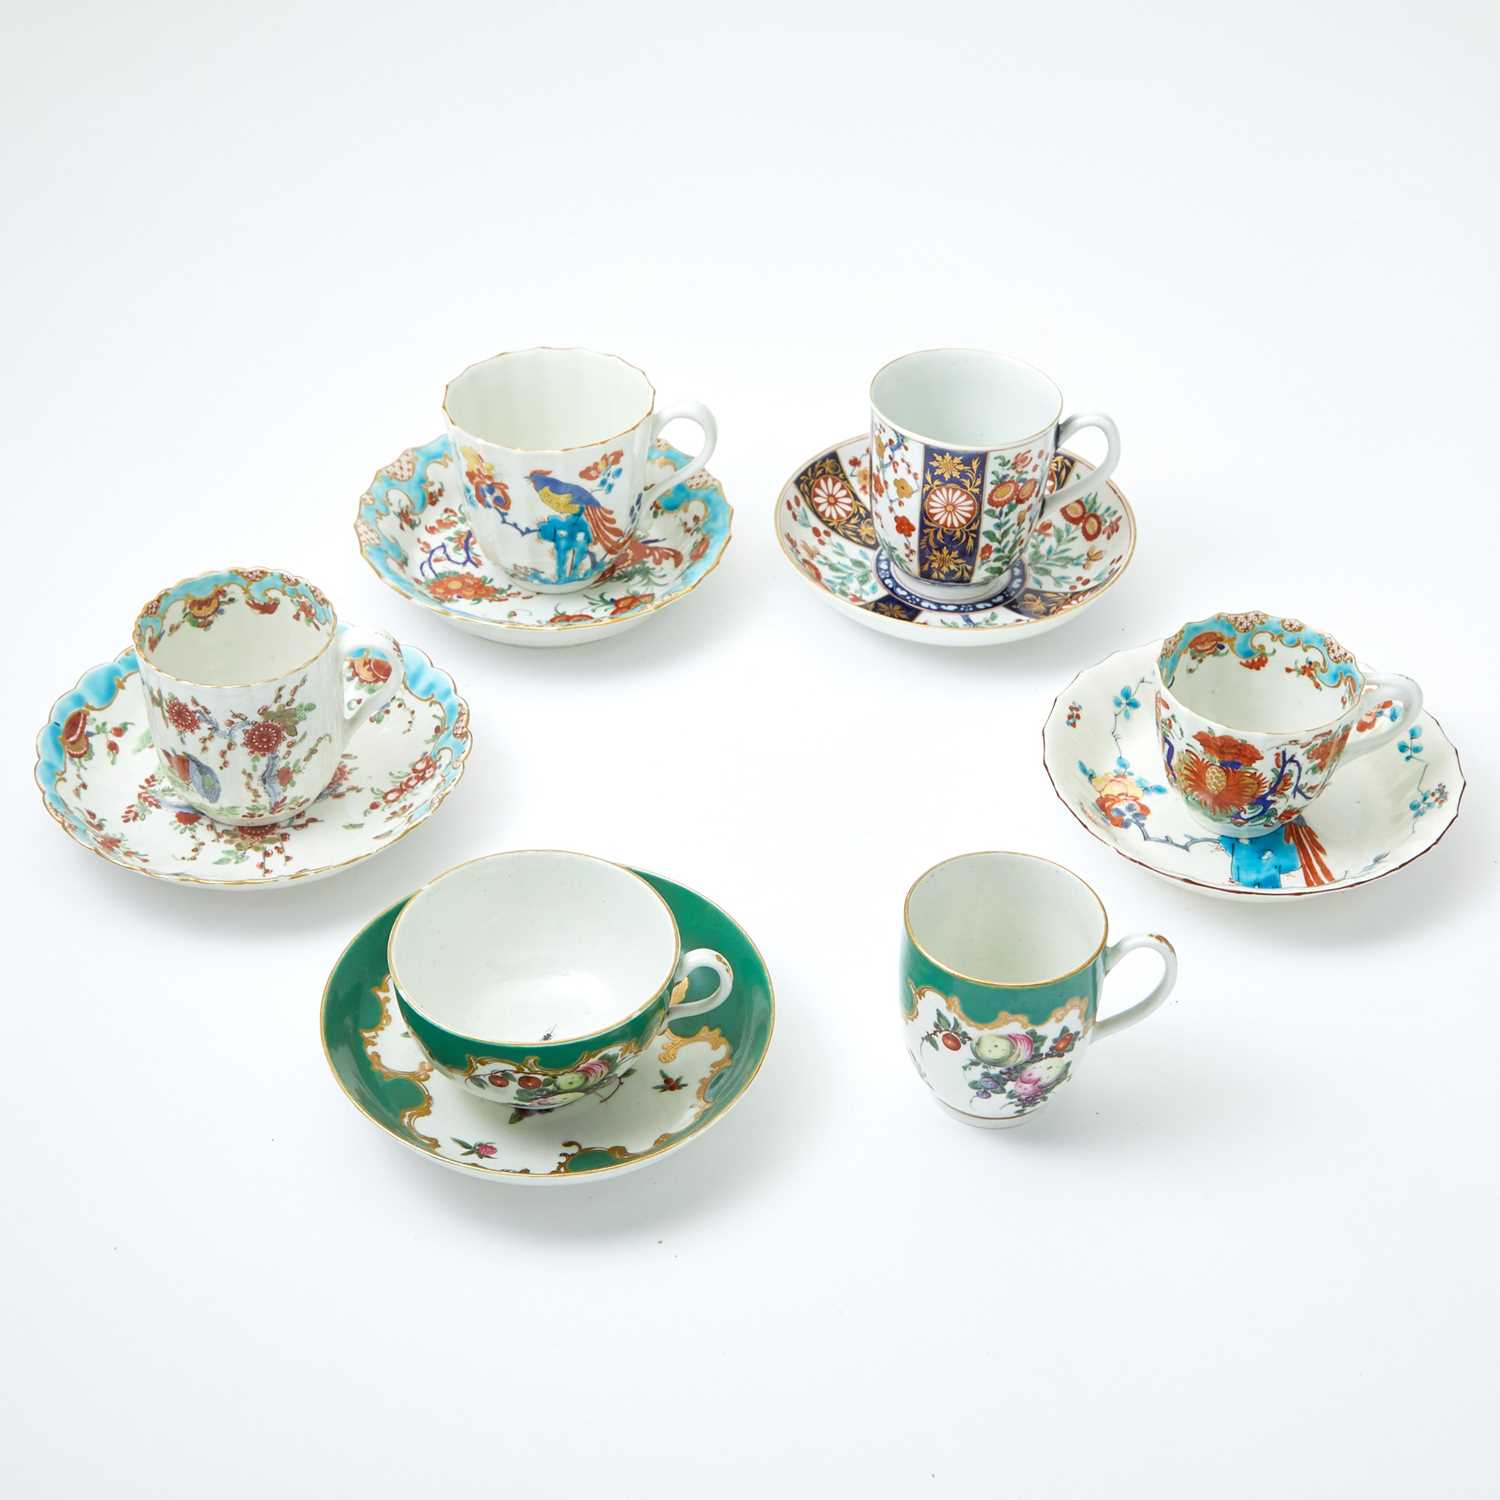 Lot 287 - Assembled Group of Six Worcester Porcelain Cups and Five Saucers